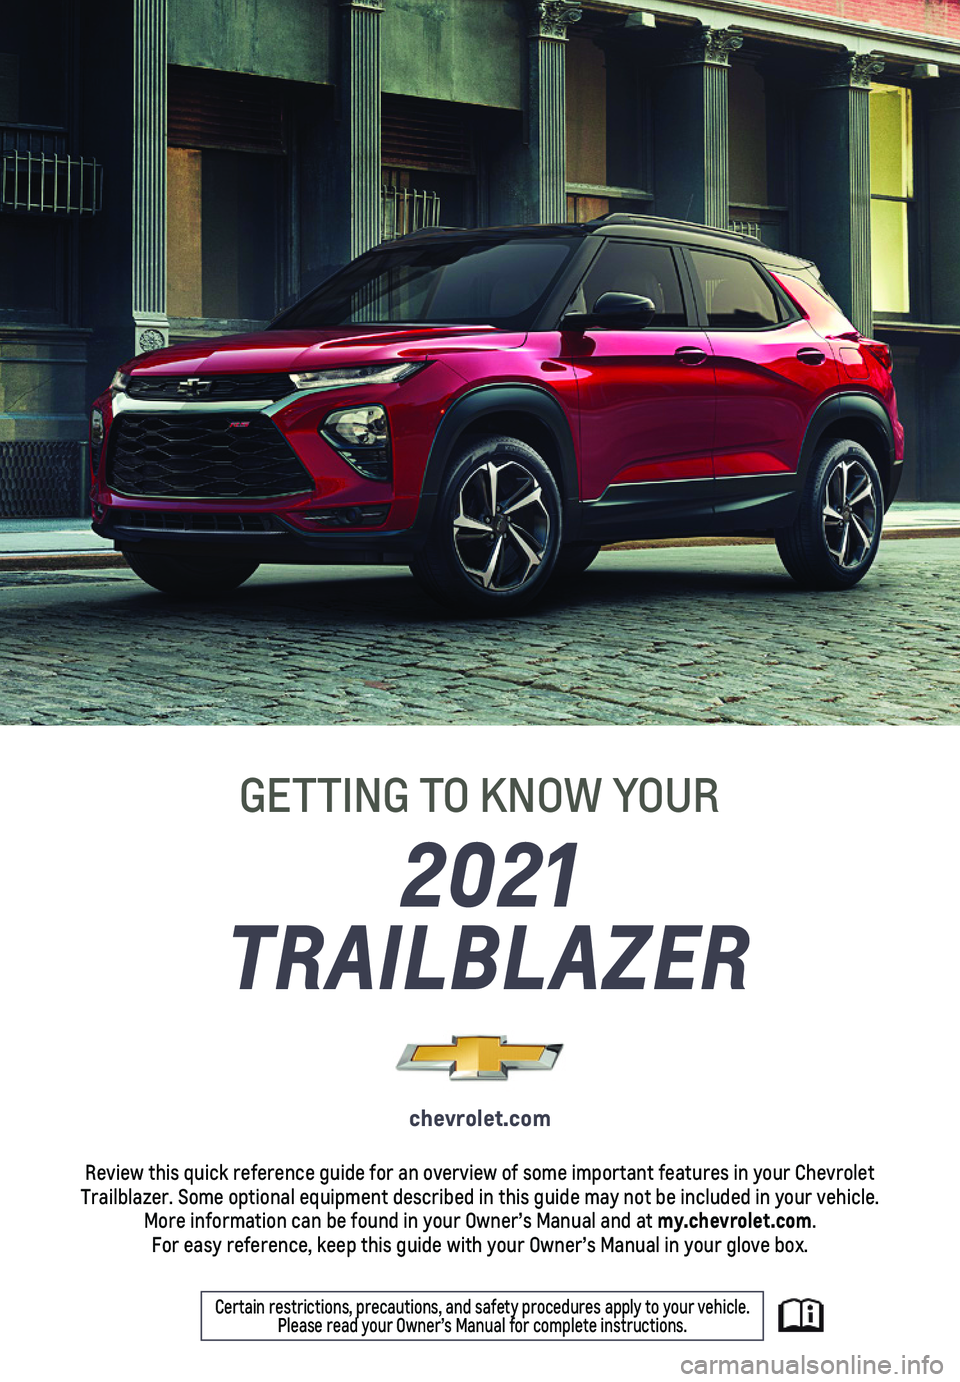 CHEVROLET TRAILBLAZER 2021  Get To Know Guide 1
2021 
TRAILBLAZER
GETTING TO KNOW YOUR
chevrolet.com
Review this quick reference guide for an overview of some important feat\
ures in your Chevrolet Trailblazer. Some optional equipment described i